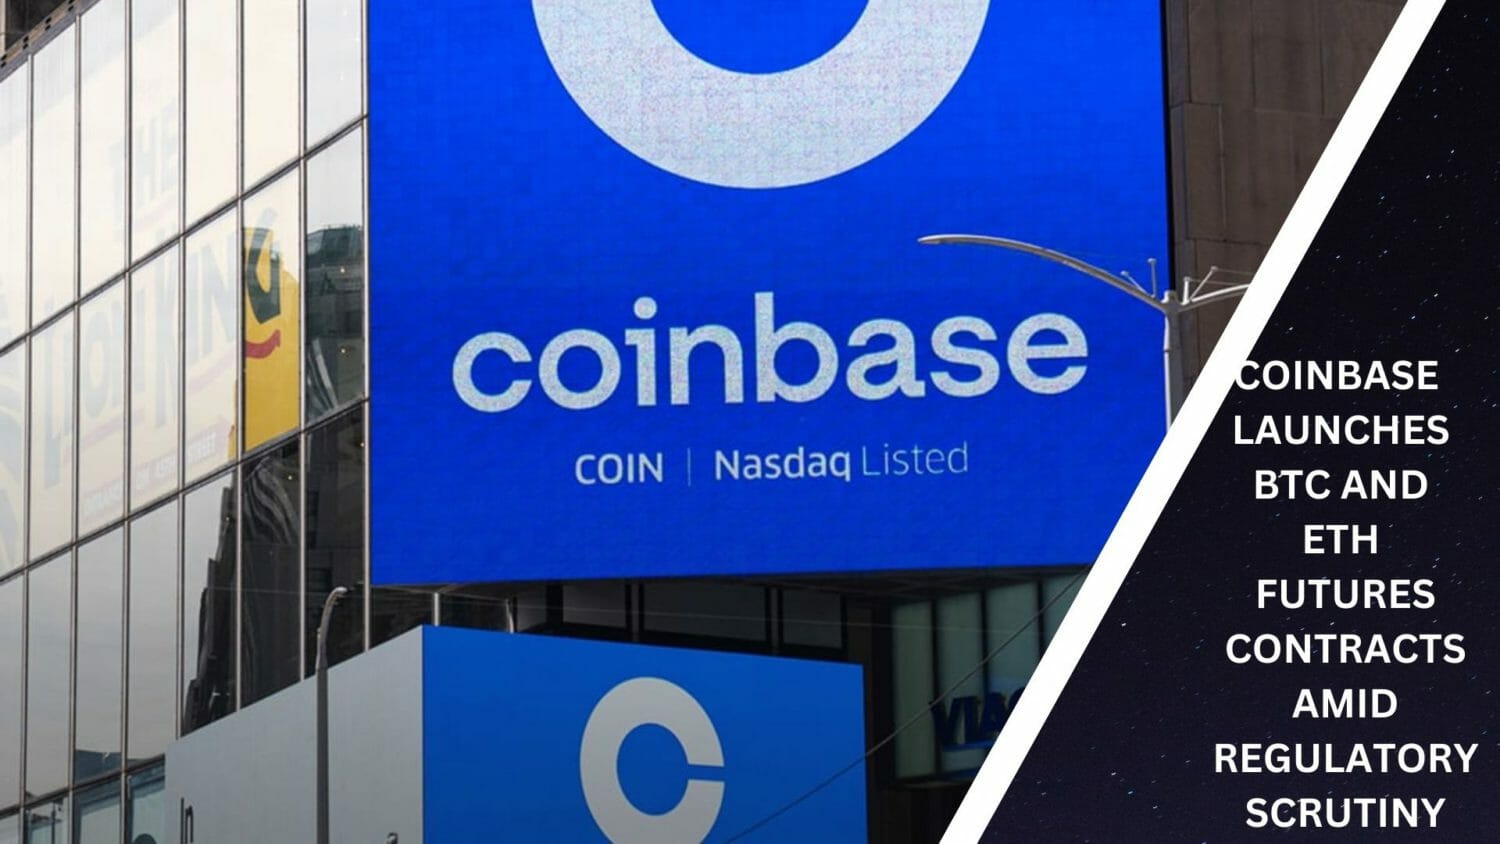 Coinbase Derivatives Exchange Launches Btc And Eth Futures Contracts Amid Regulatory Scrutiny